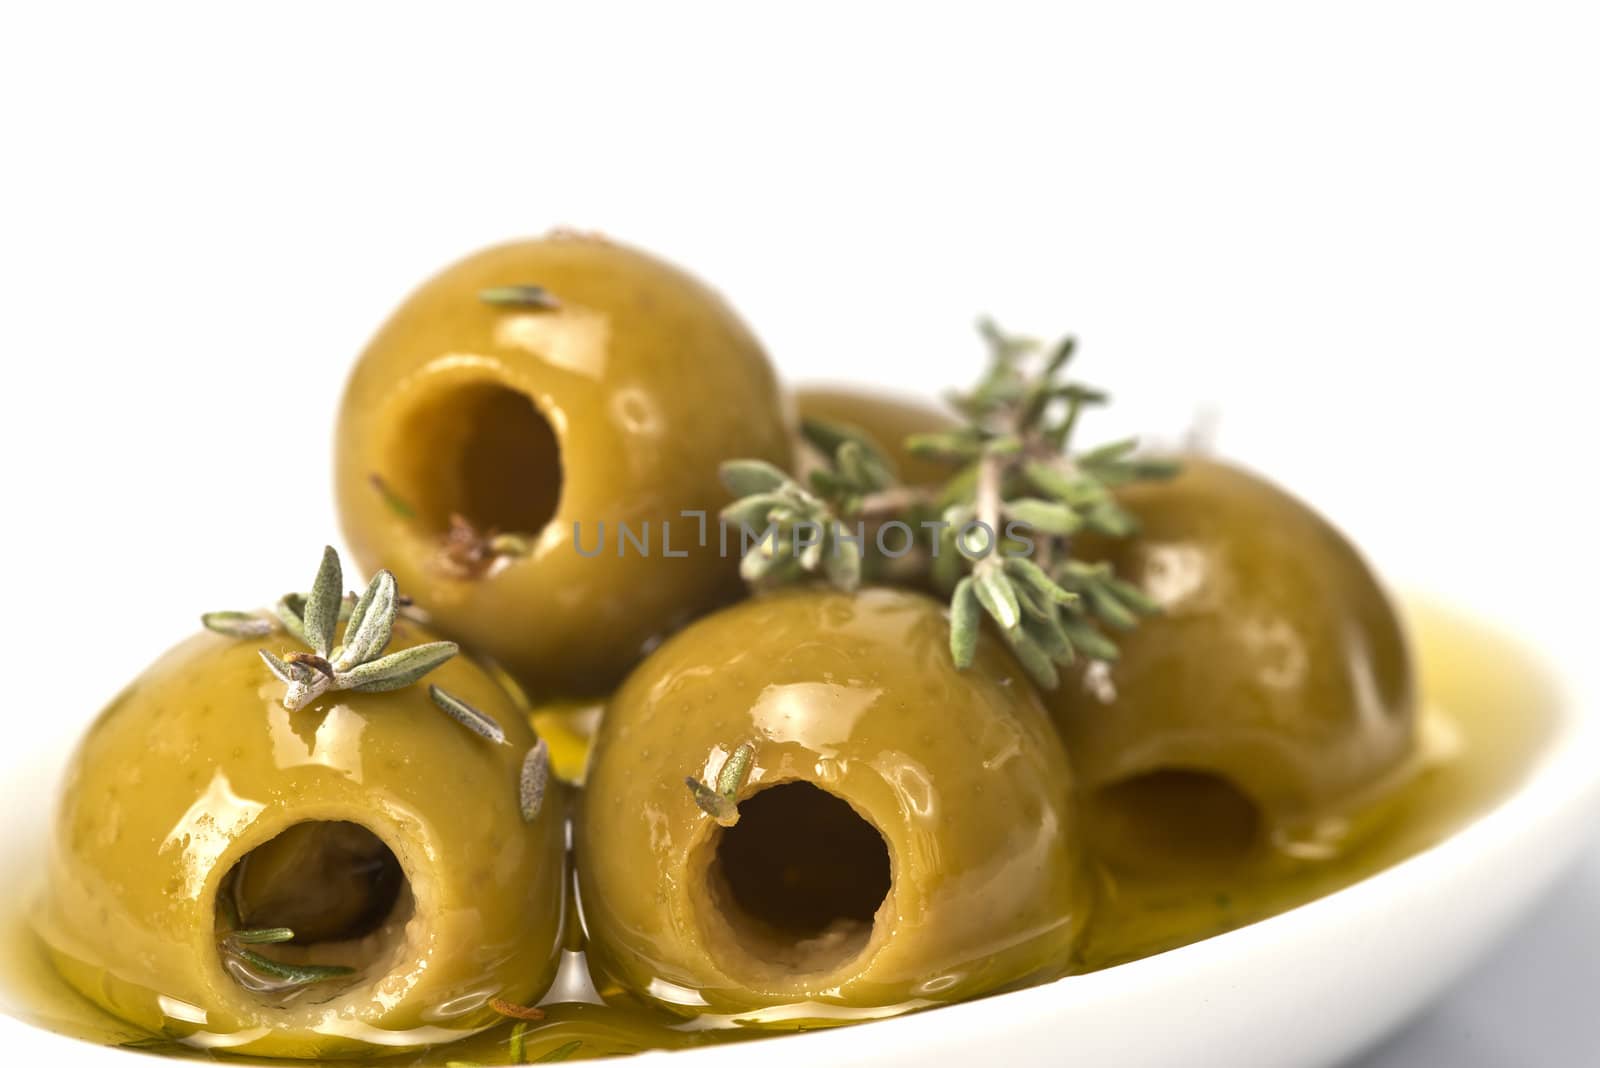 Pitted olives on a white background by angelsimon